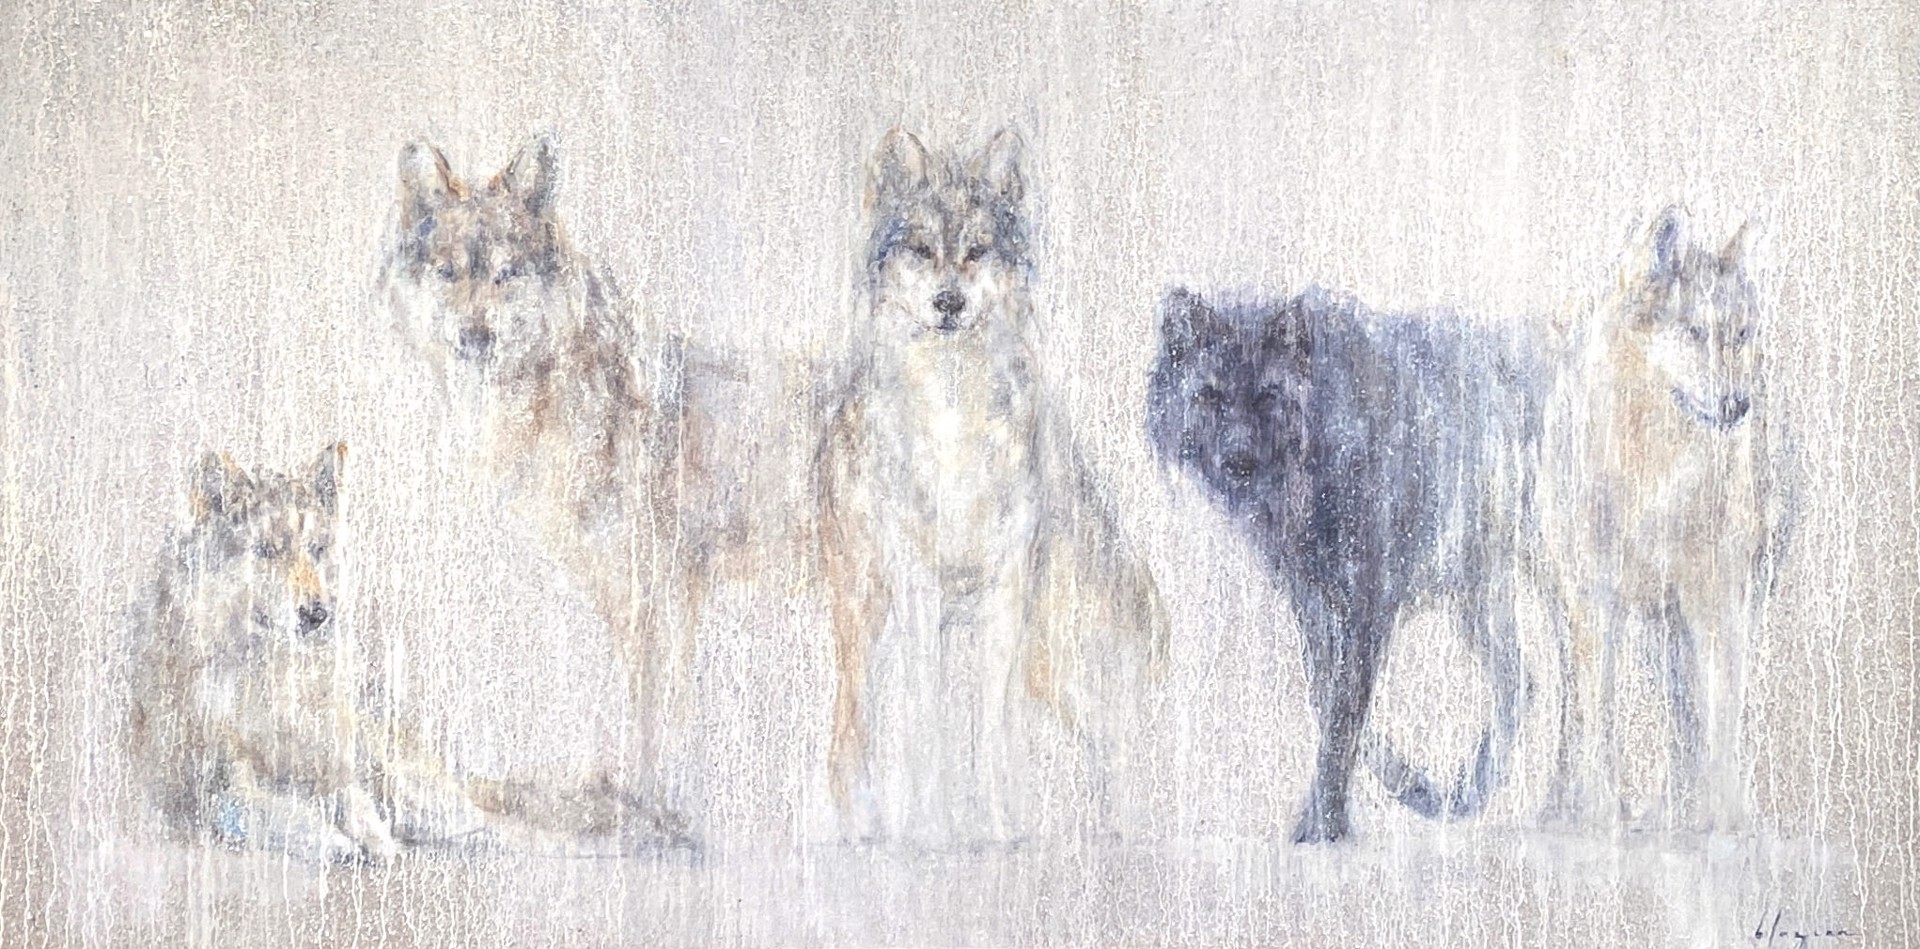 Original Oil Painting Featuring Four Grey Wolves And One Black Wolf With A Light Wash Background And Drop Details